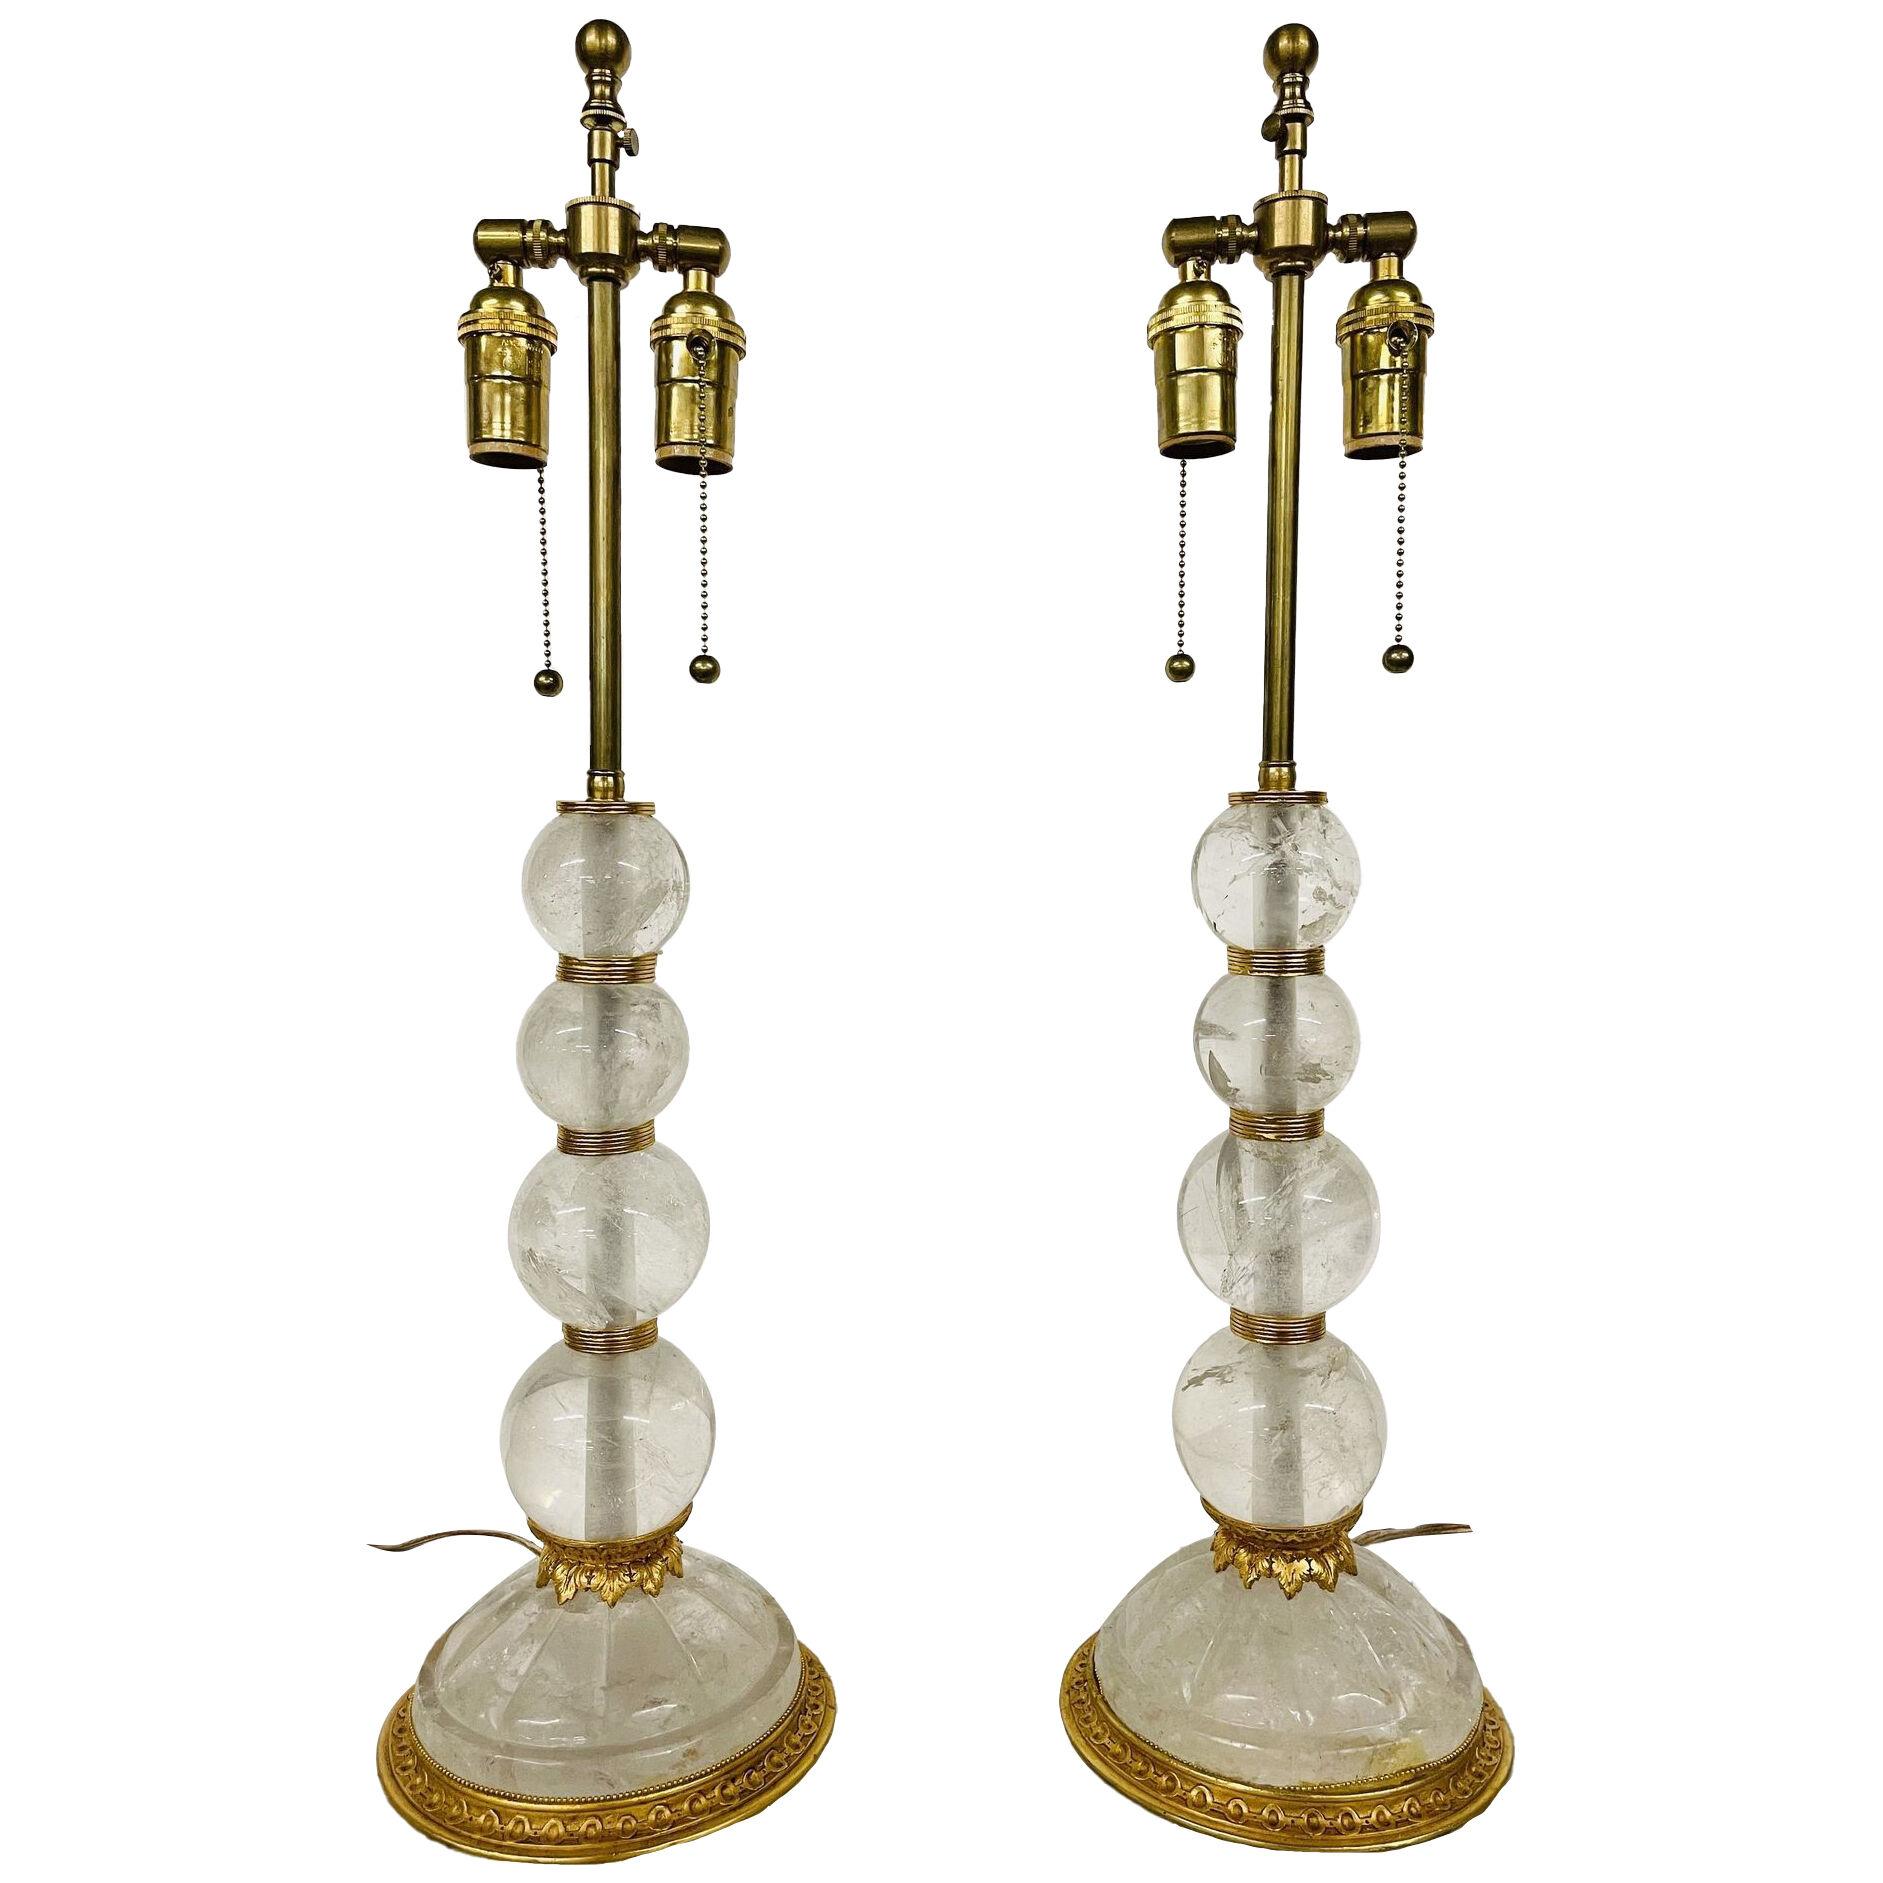 Pair of Baques Rock Crystal Table Lamps, 19th/20th Century